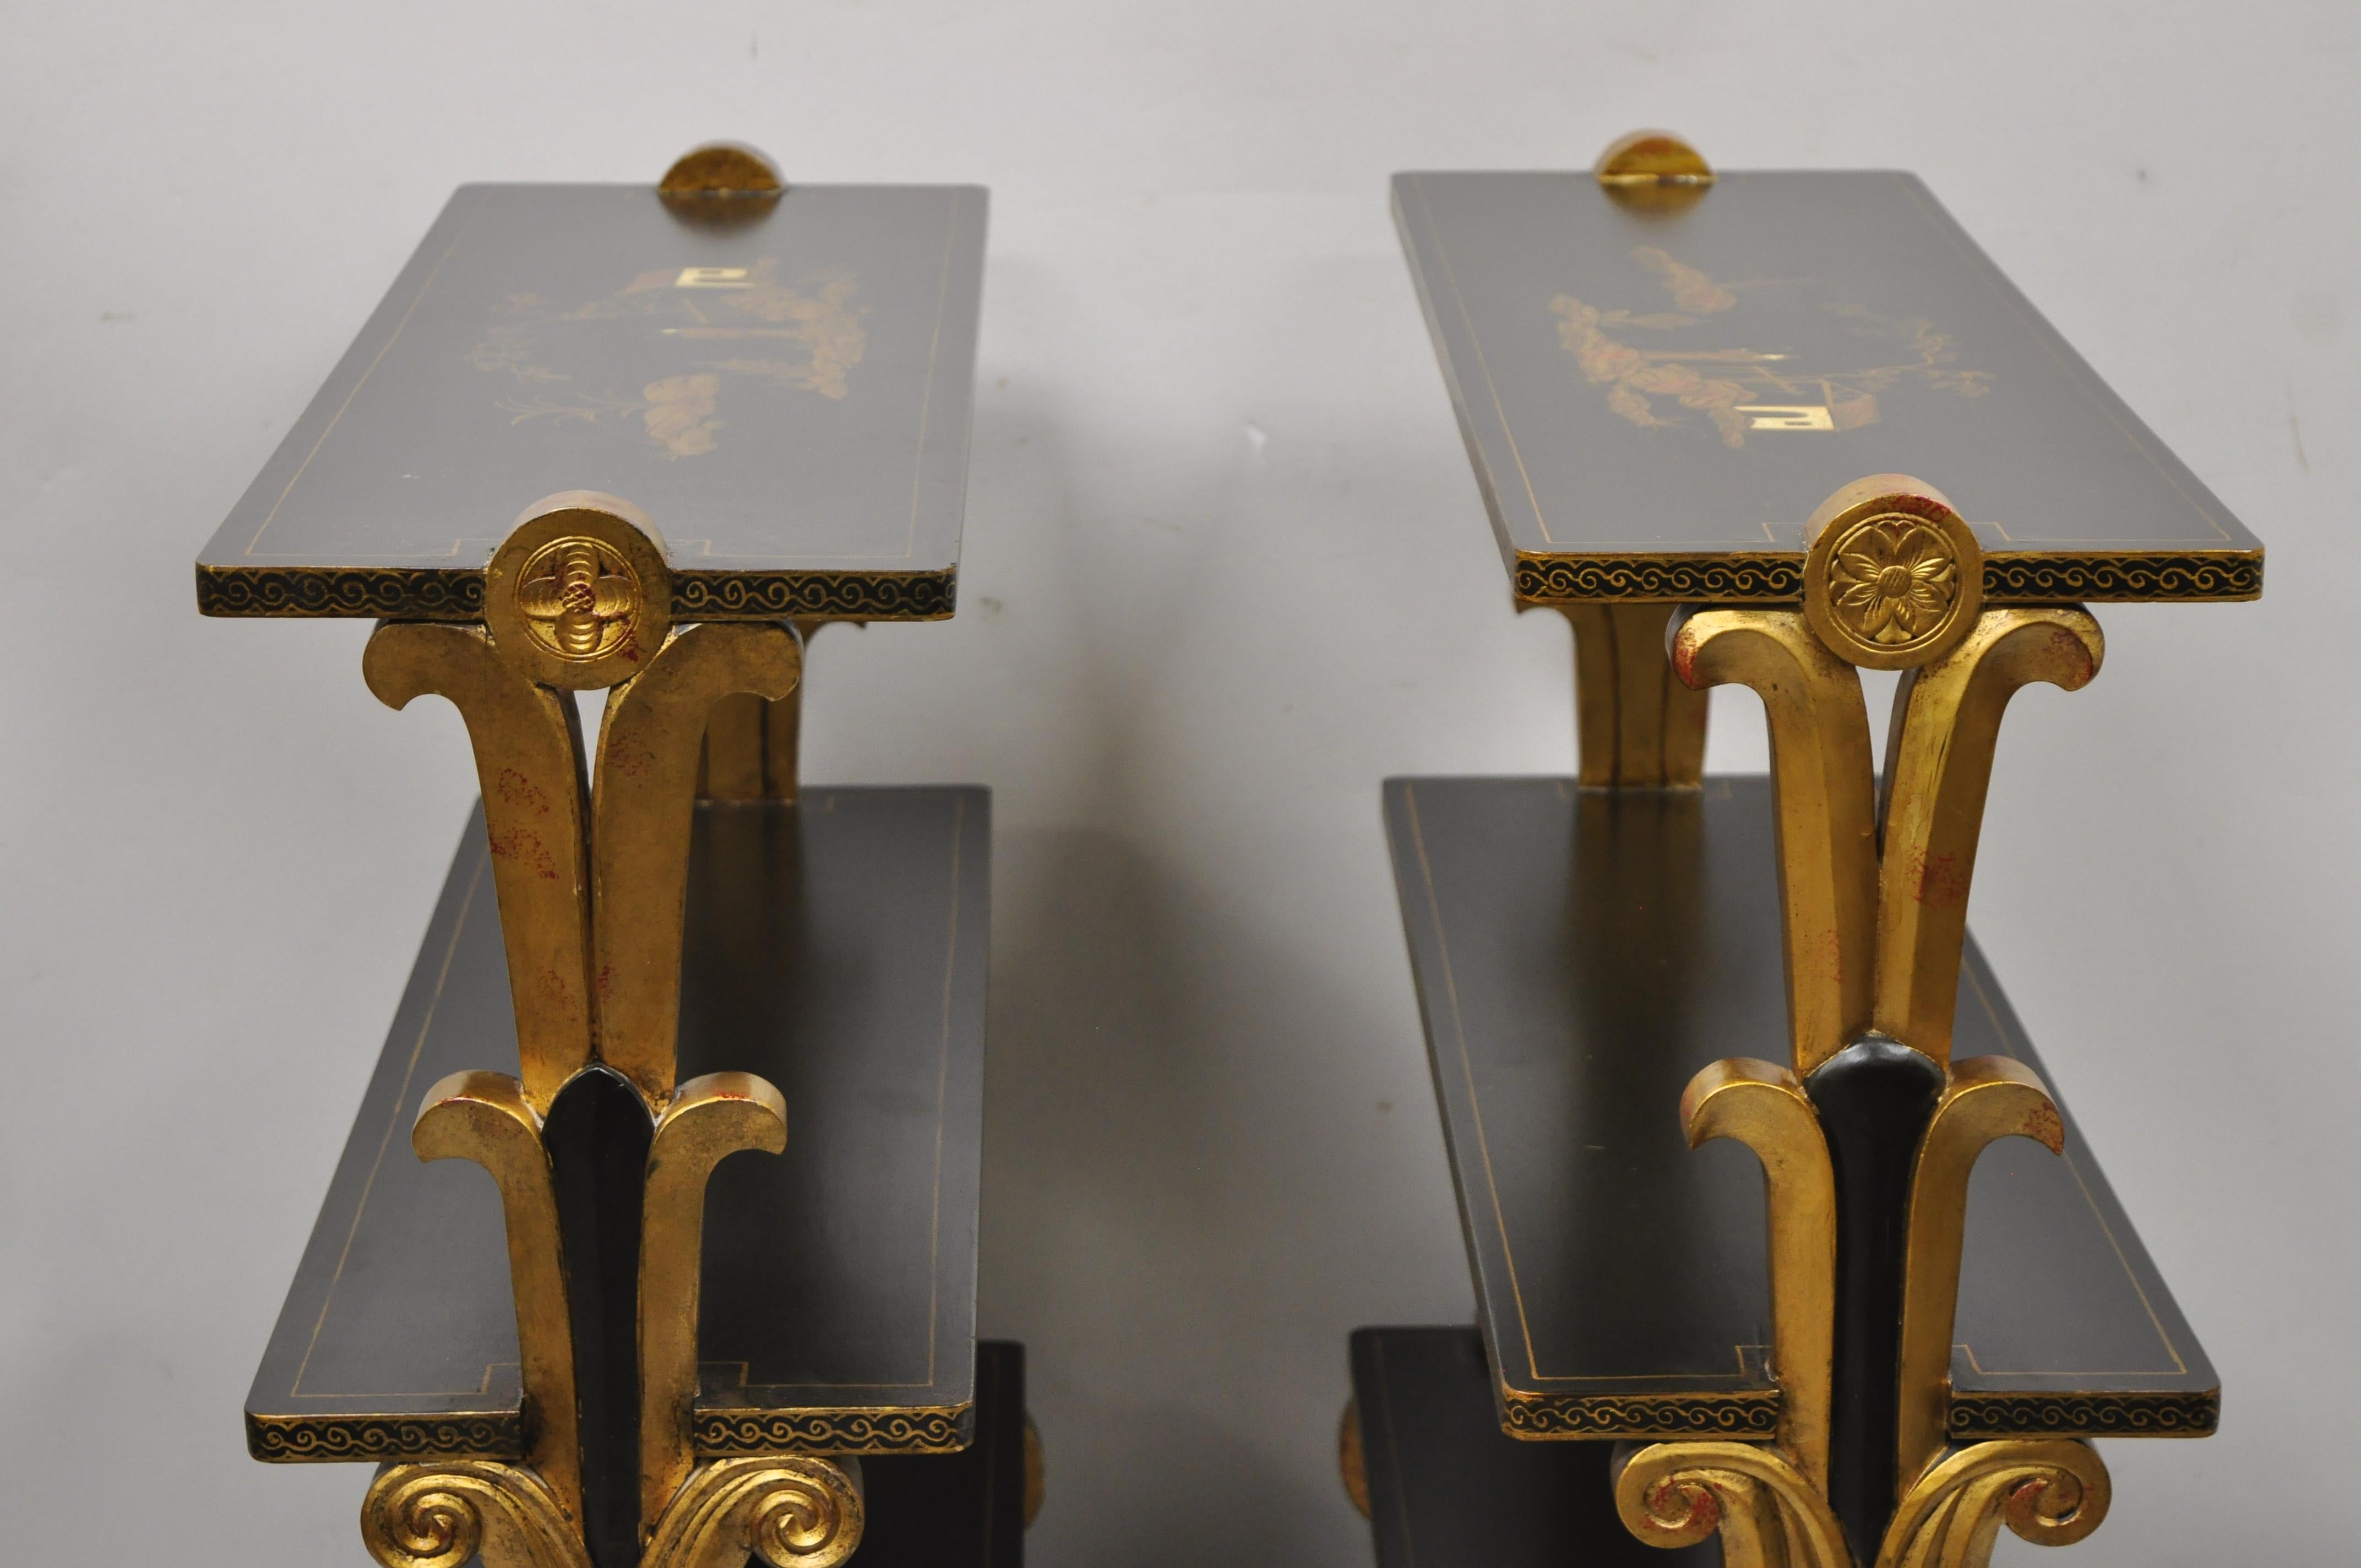 Contemporary Regency Style Black & Gold 3 Tier Whatnot Stands Bookcase Shelves Curio, a Pair For Sale